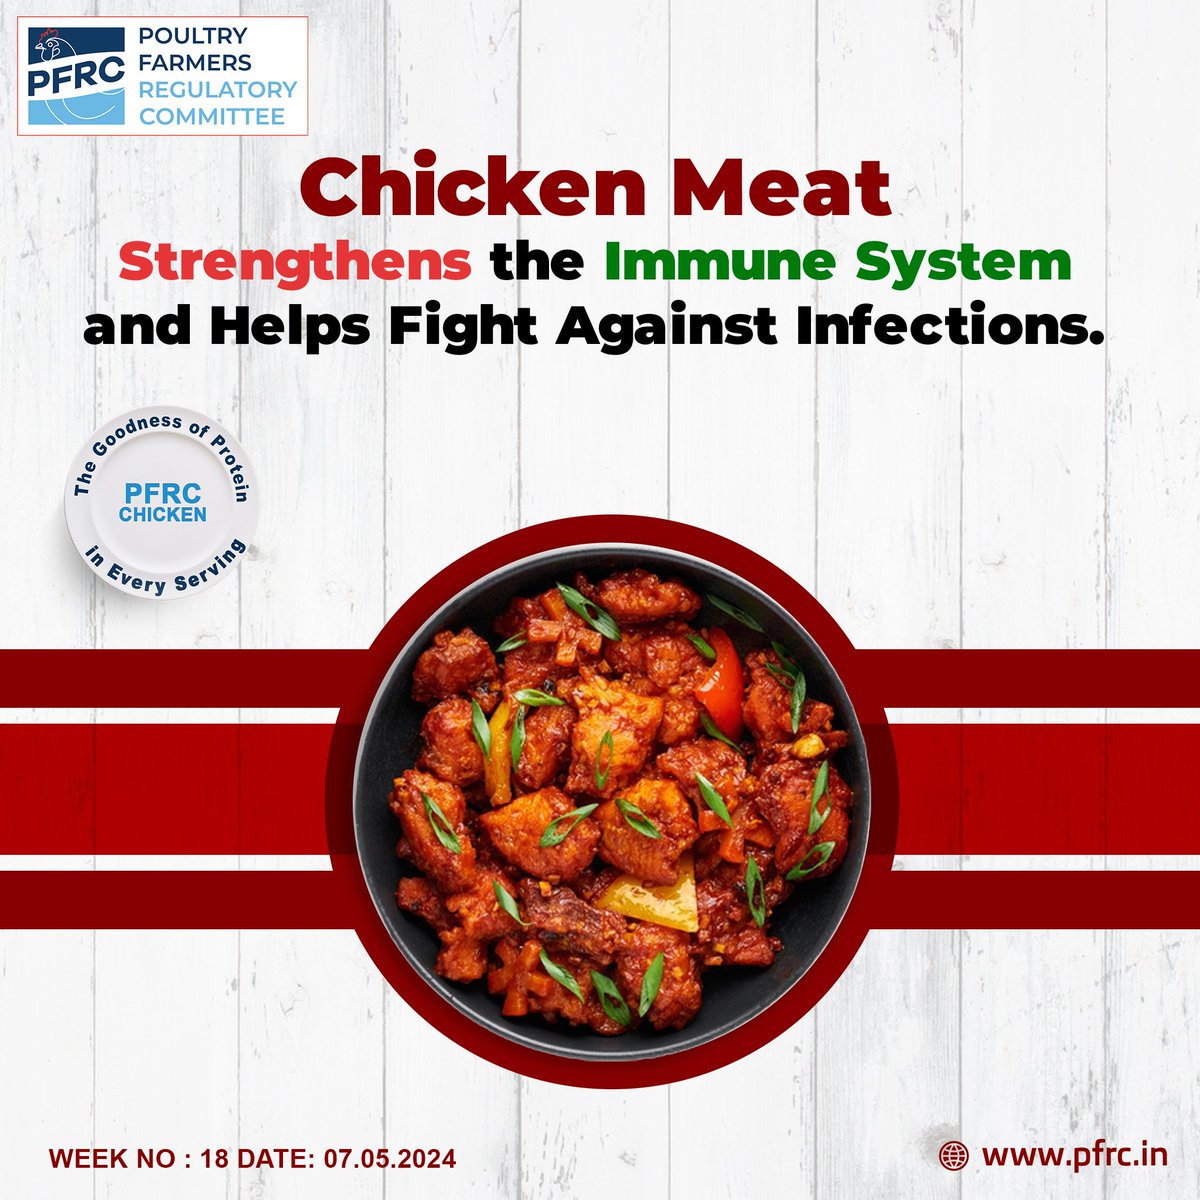 Chicken Meat Strengthens the Immune System and Helps Fight Against Infections.

#chicken #protein #nutrients #bones #heart #weight #vitamin #immunity #health #deliciousfood #chickencurry #healthy #food #chickenlover #chickenrecipes #eatmorechicken #poultryfood #farm #pfrc #pfrctn